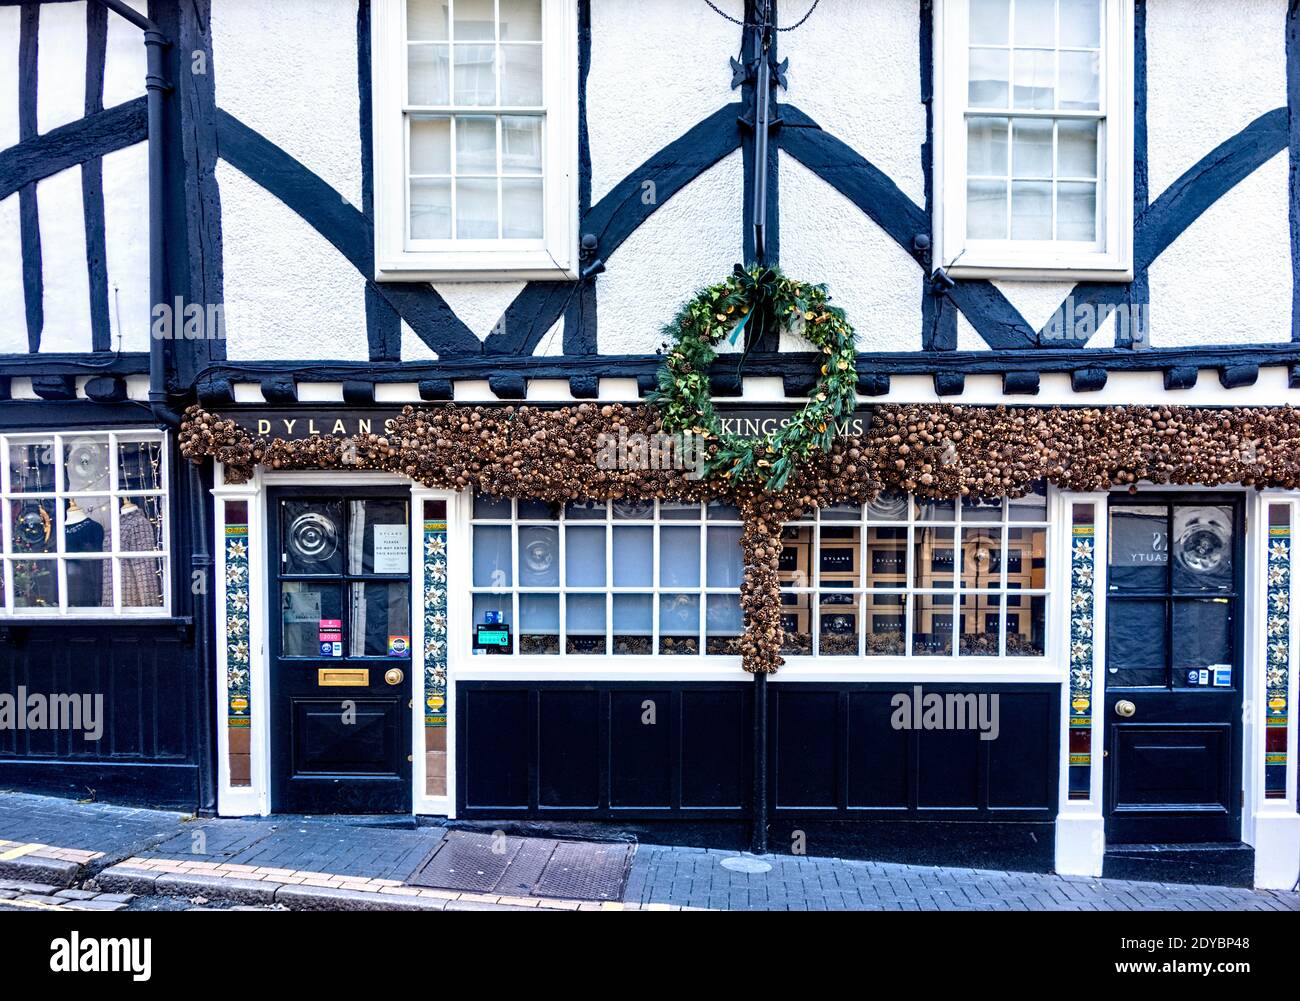 Dylans Restaurant at The Kings Arms Pub George Street, St. Albans Hertfordshire Stock Photo